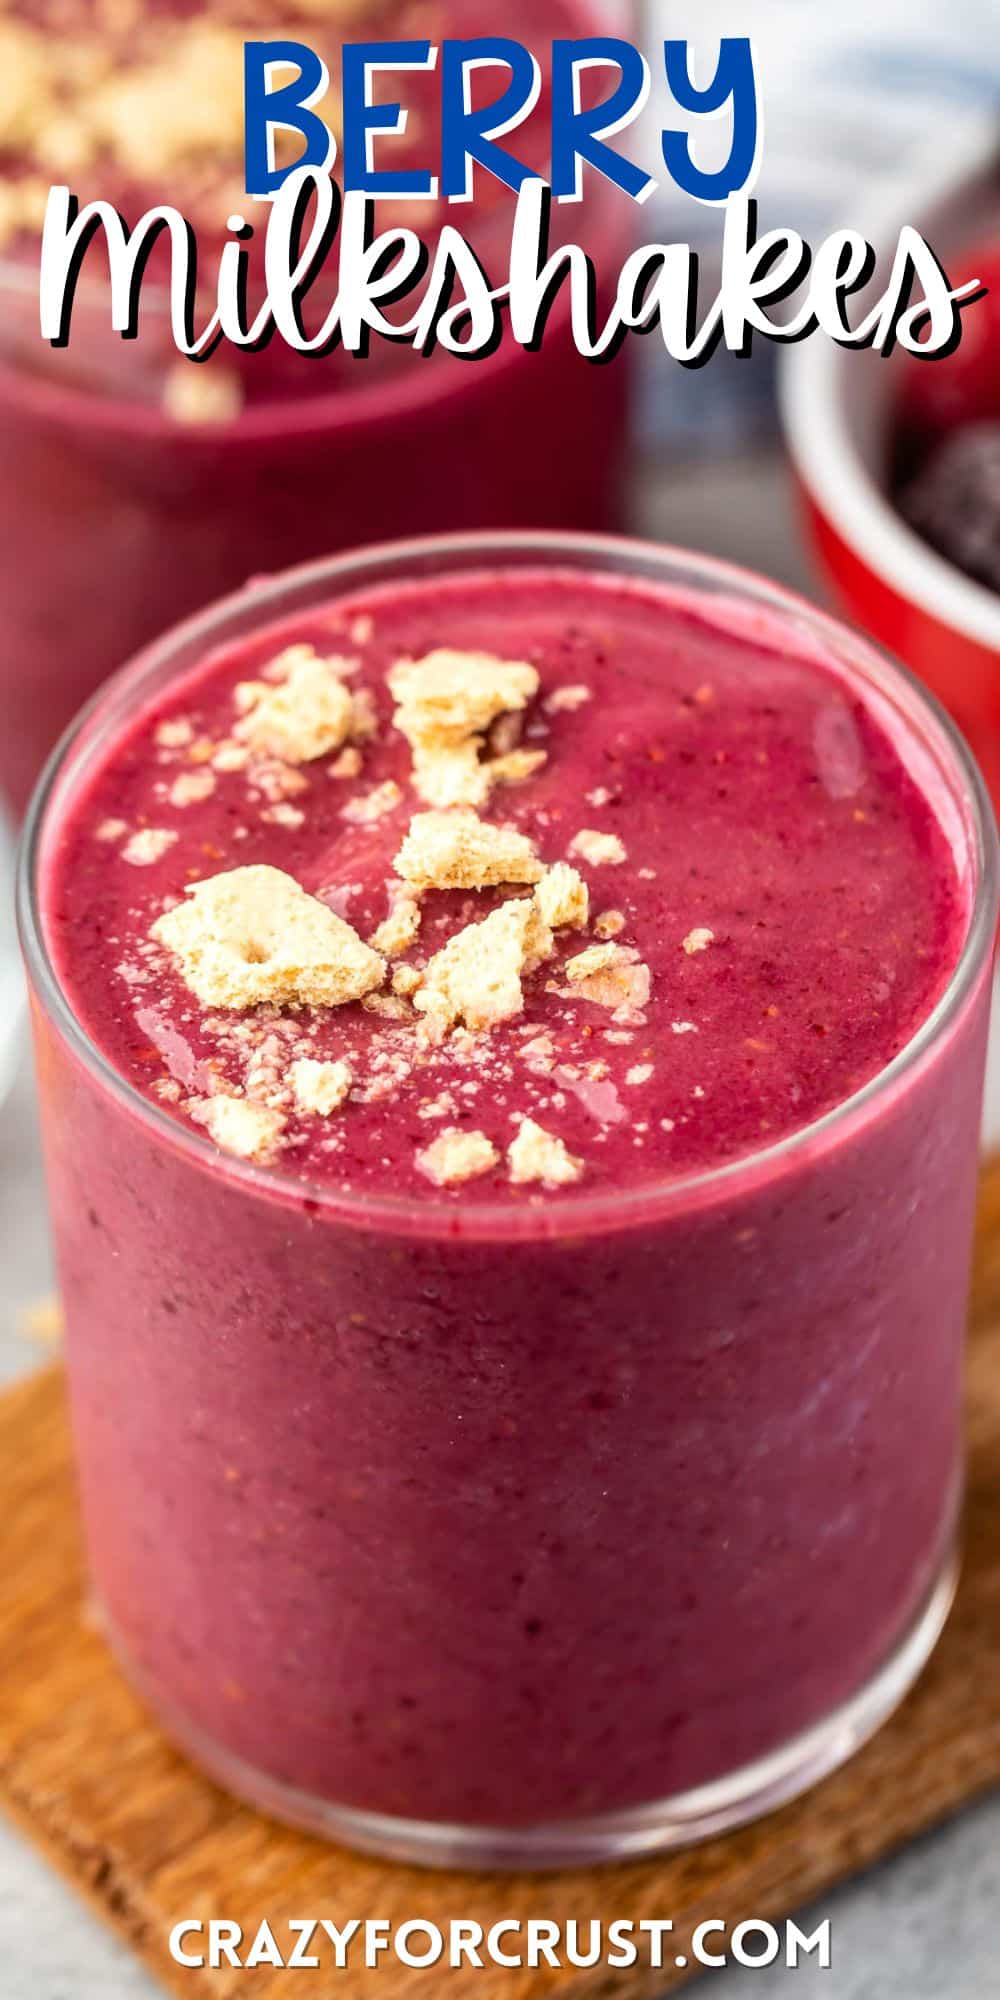 pink smoothie in a clear glass with crumbled cookies on top with words on the image.